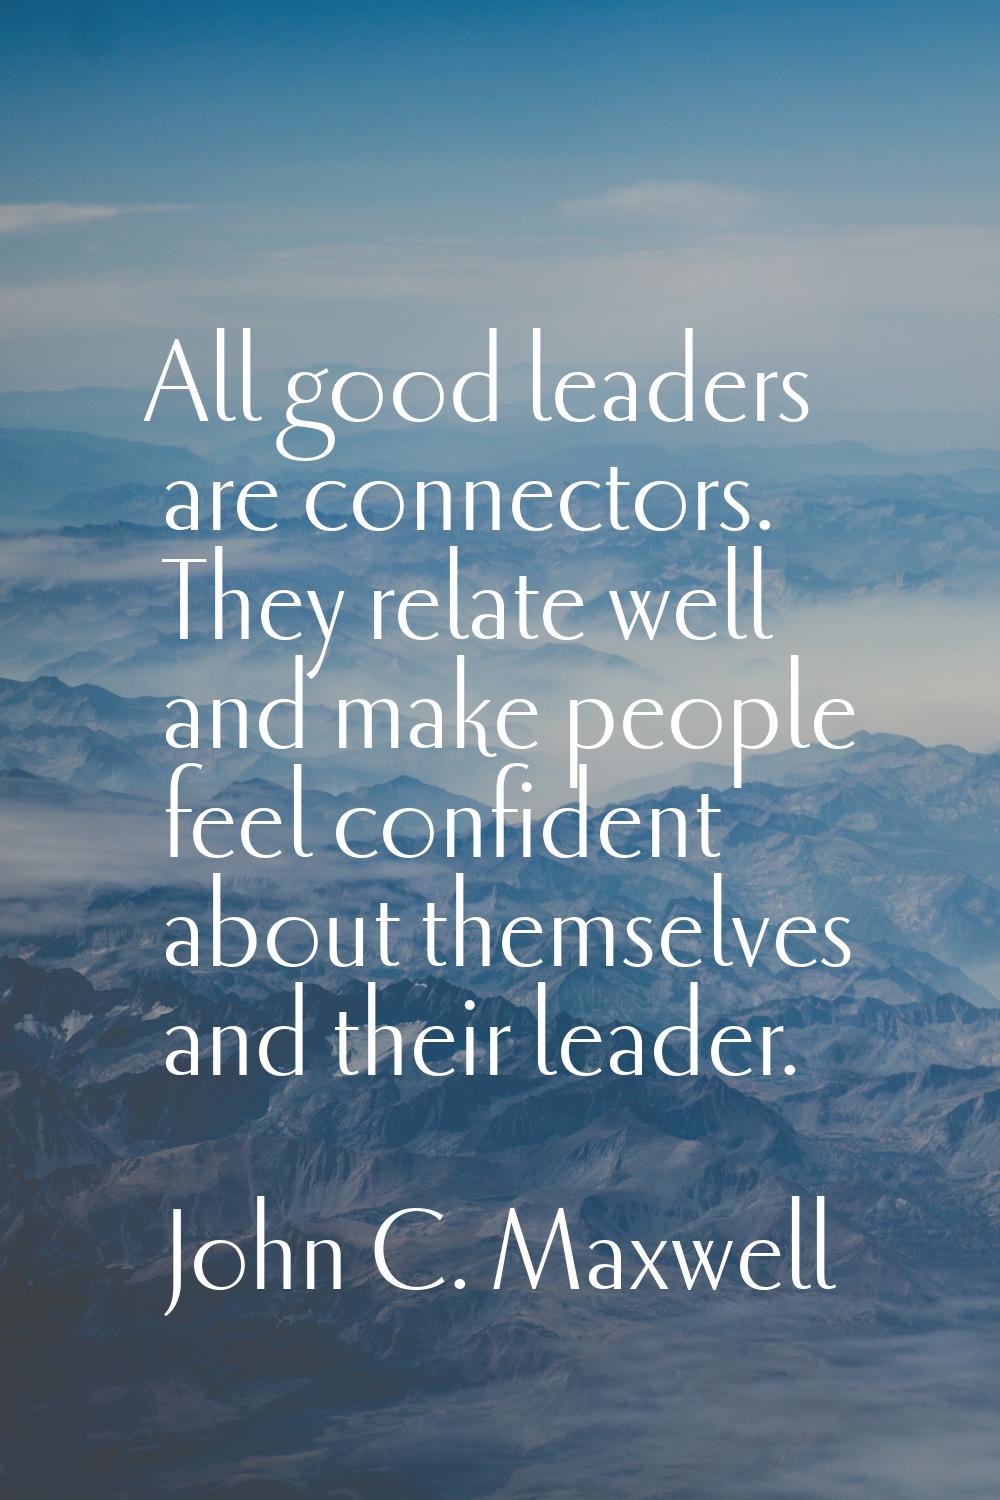 All good leaders are connectors. They relate well and make people feel confident about themselves a